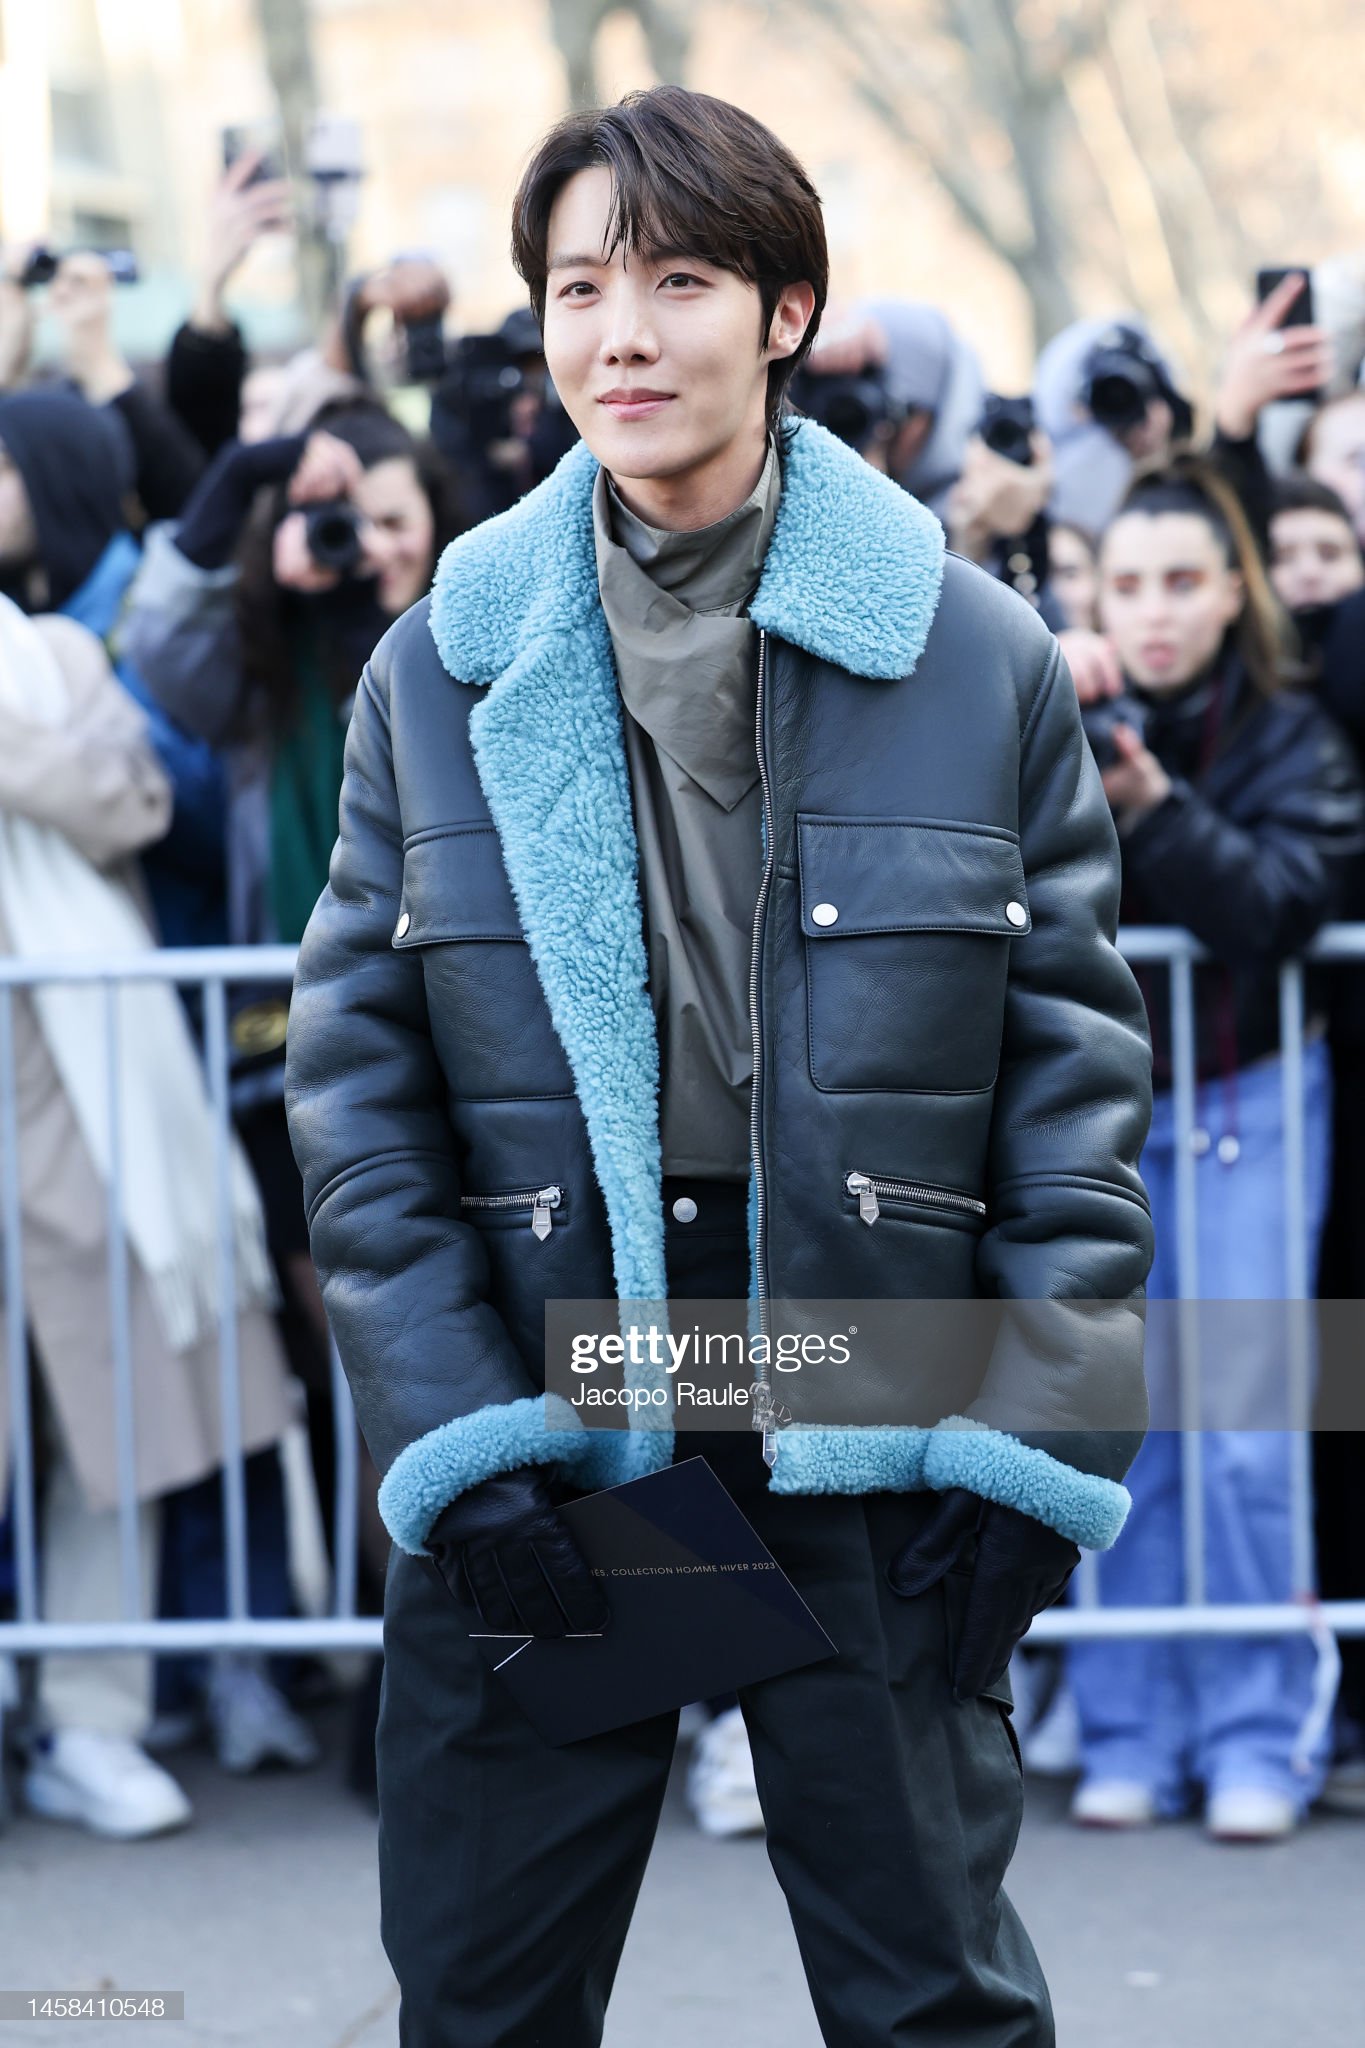 j-hope and Jimin take Paris for Louis Vuitton, Dior, and Hermes